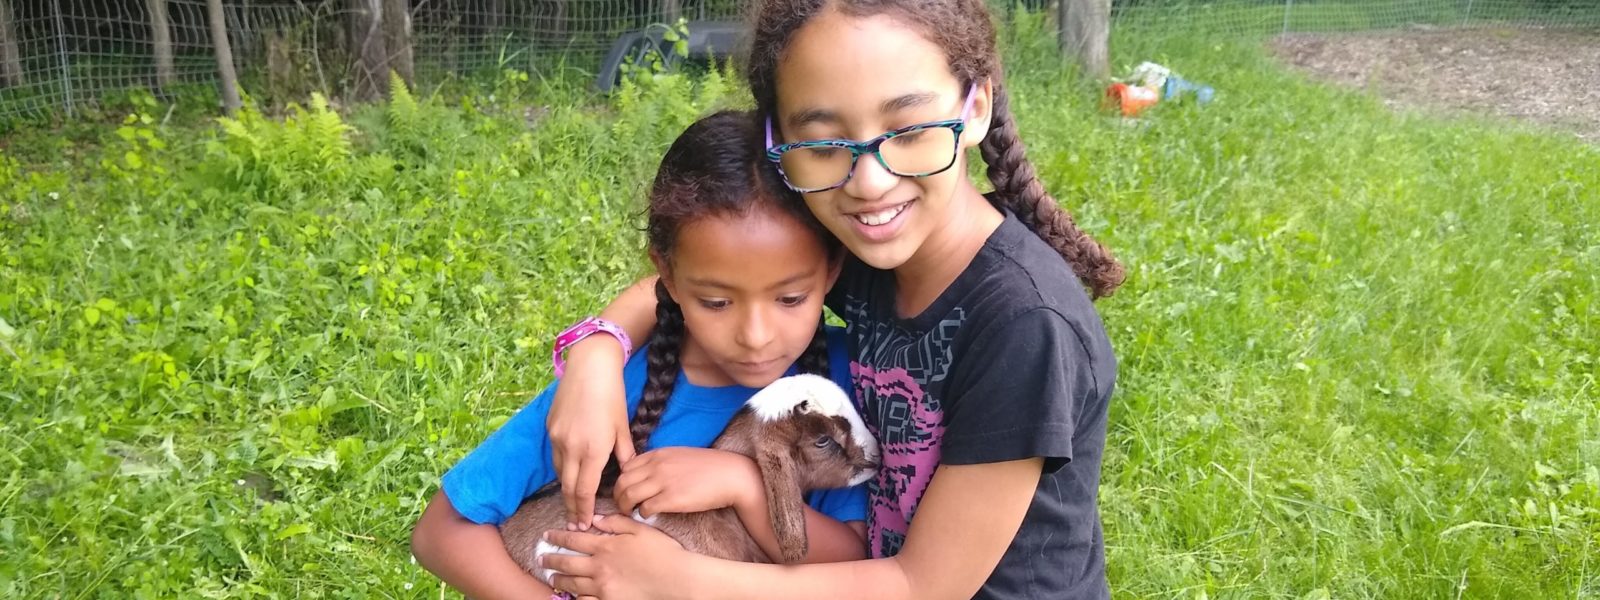 Two young girls embracing and holding a baby goat